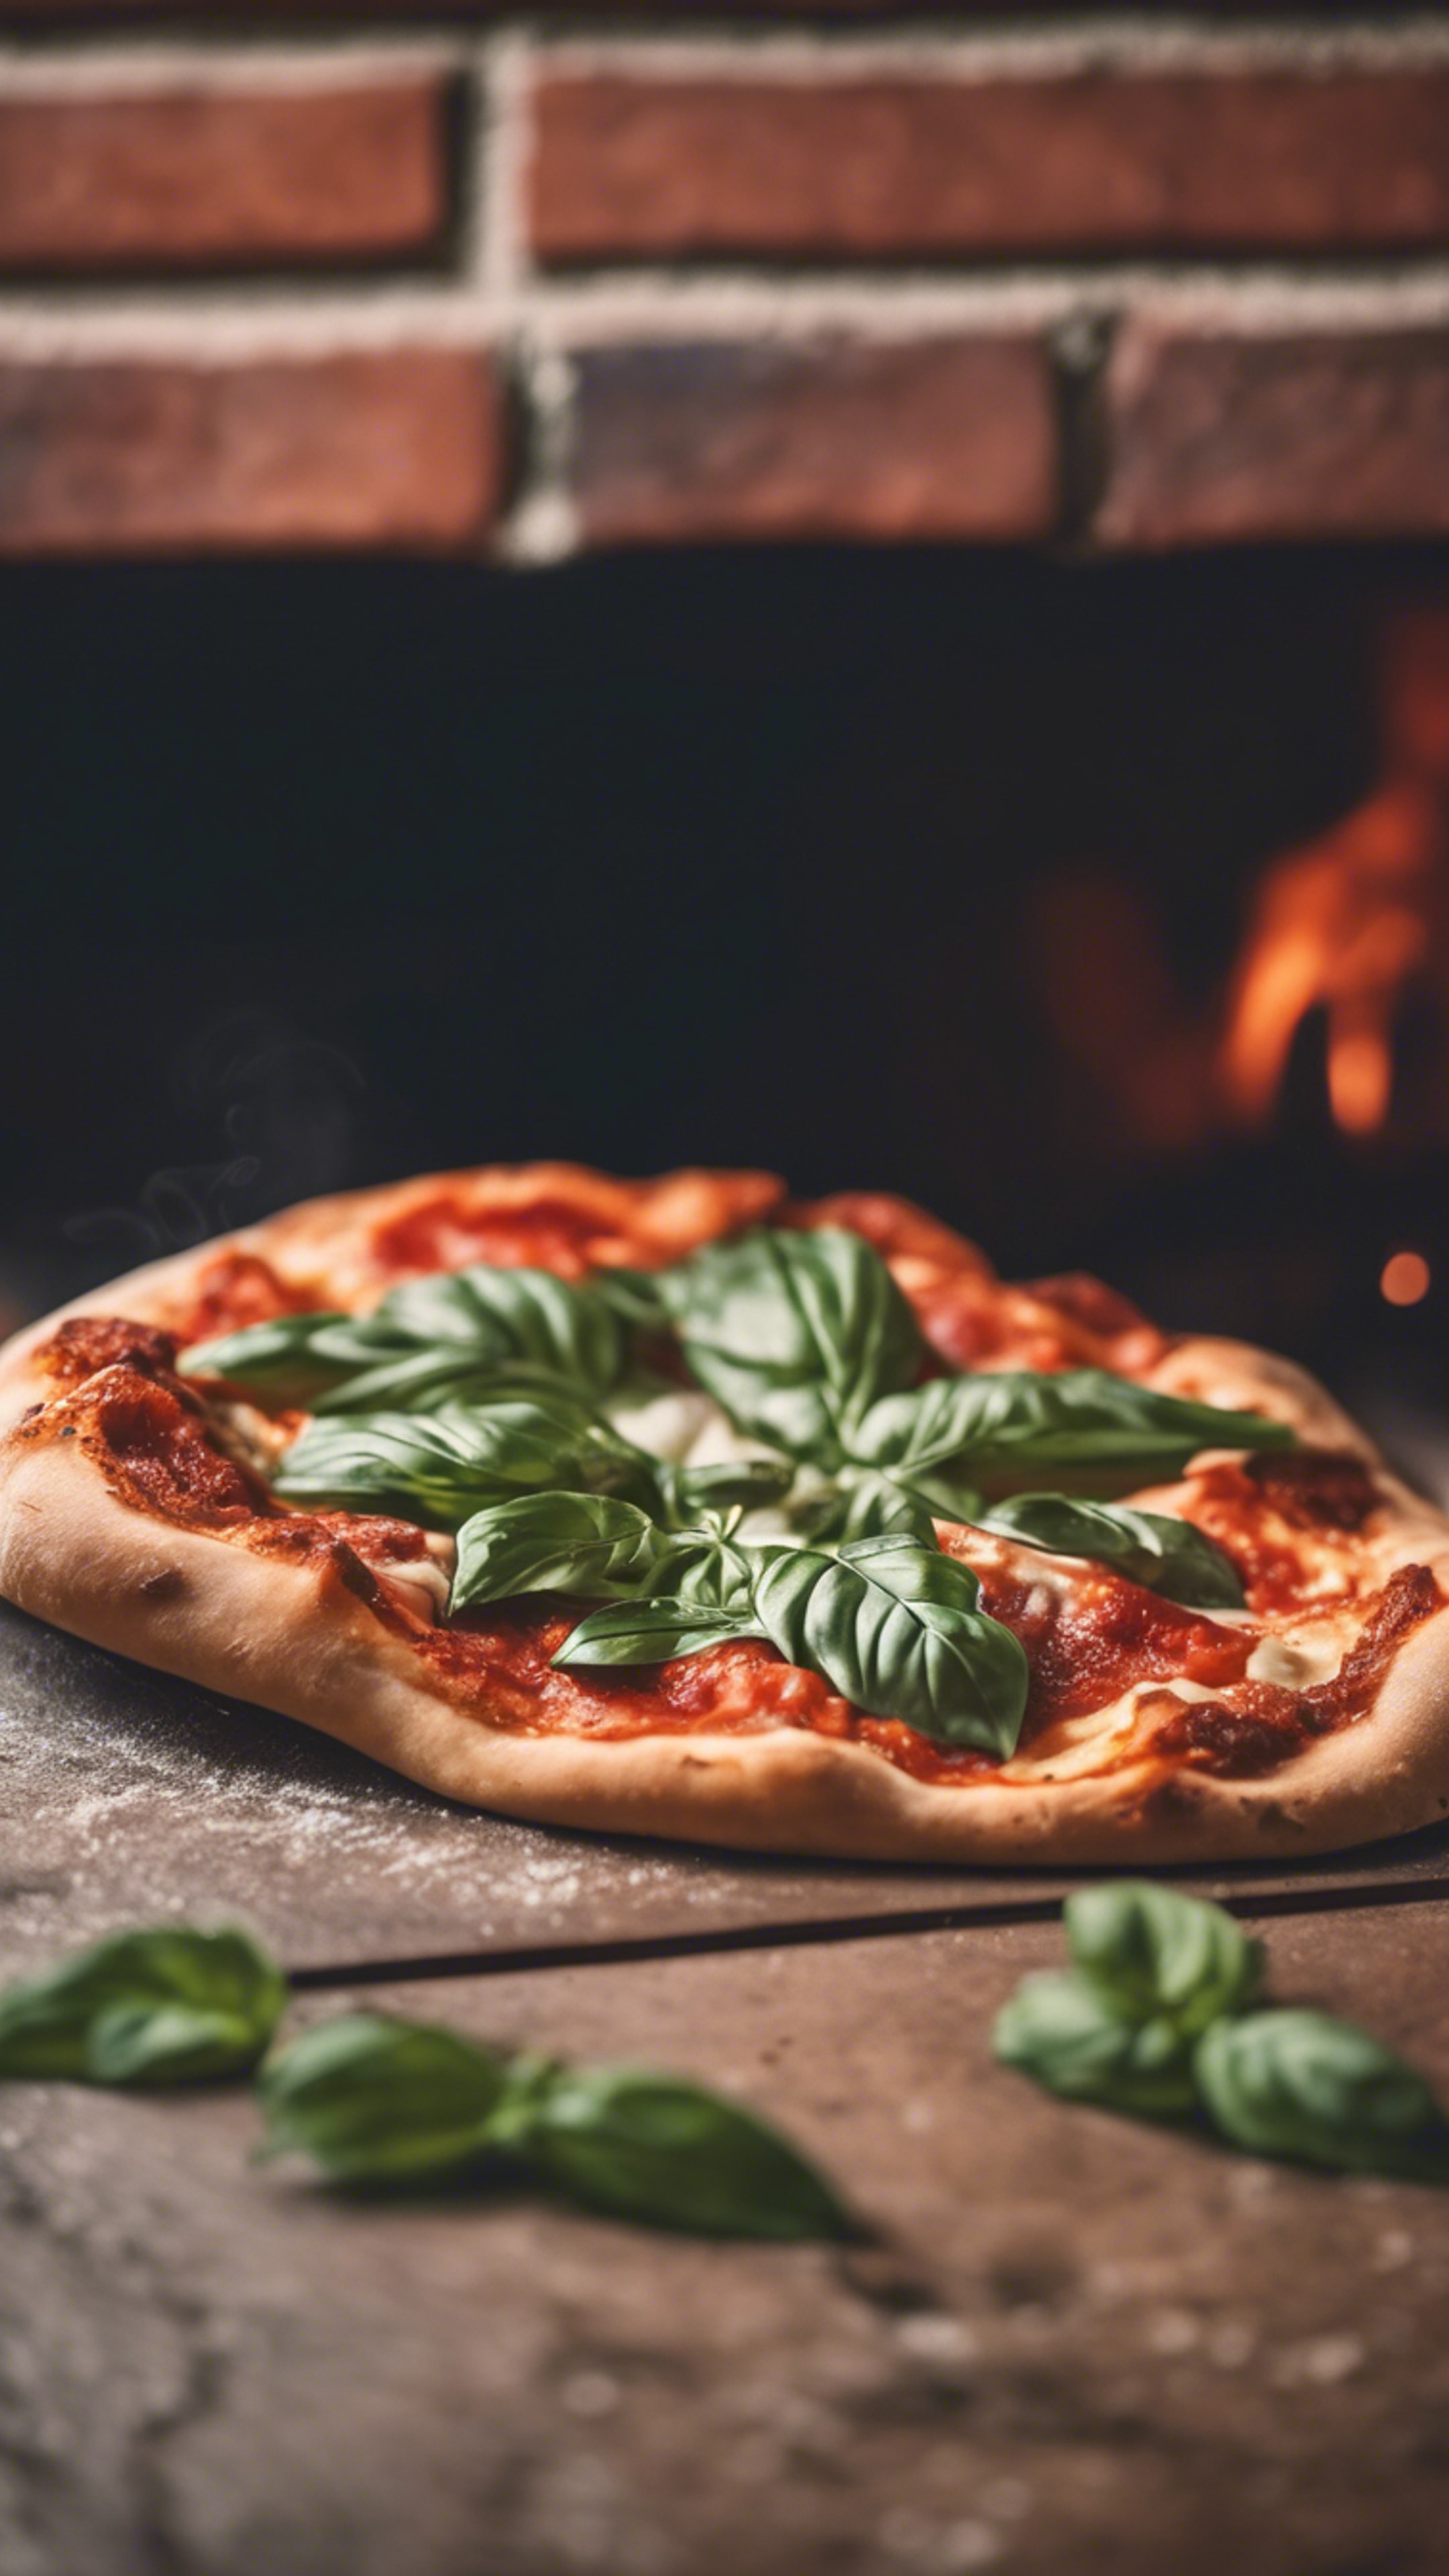 A classic Neapolitan pizza with whole basil leaves being baked in an antique brick oven. Wallpaper[7bb37e653cbf4aa7b39e]